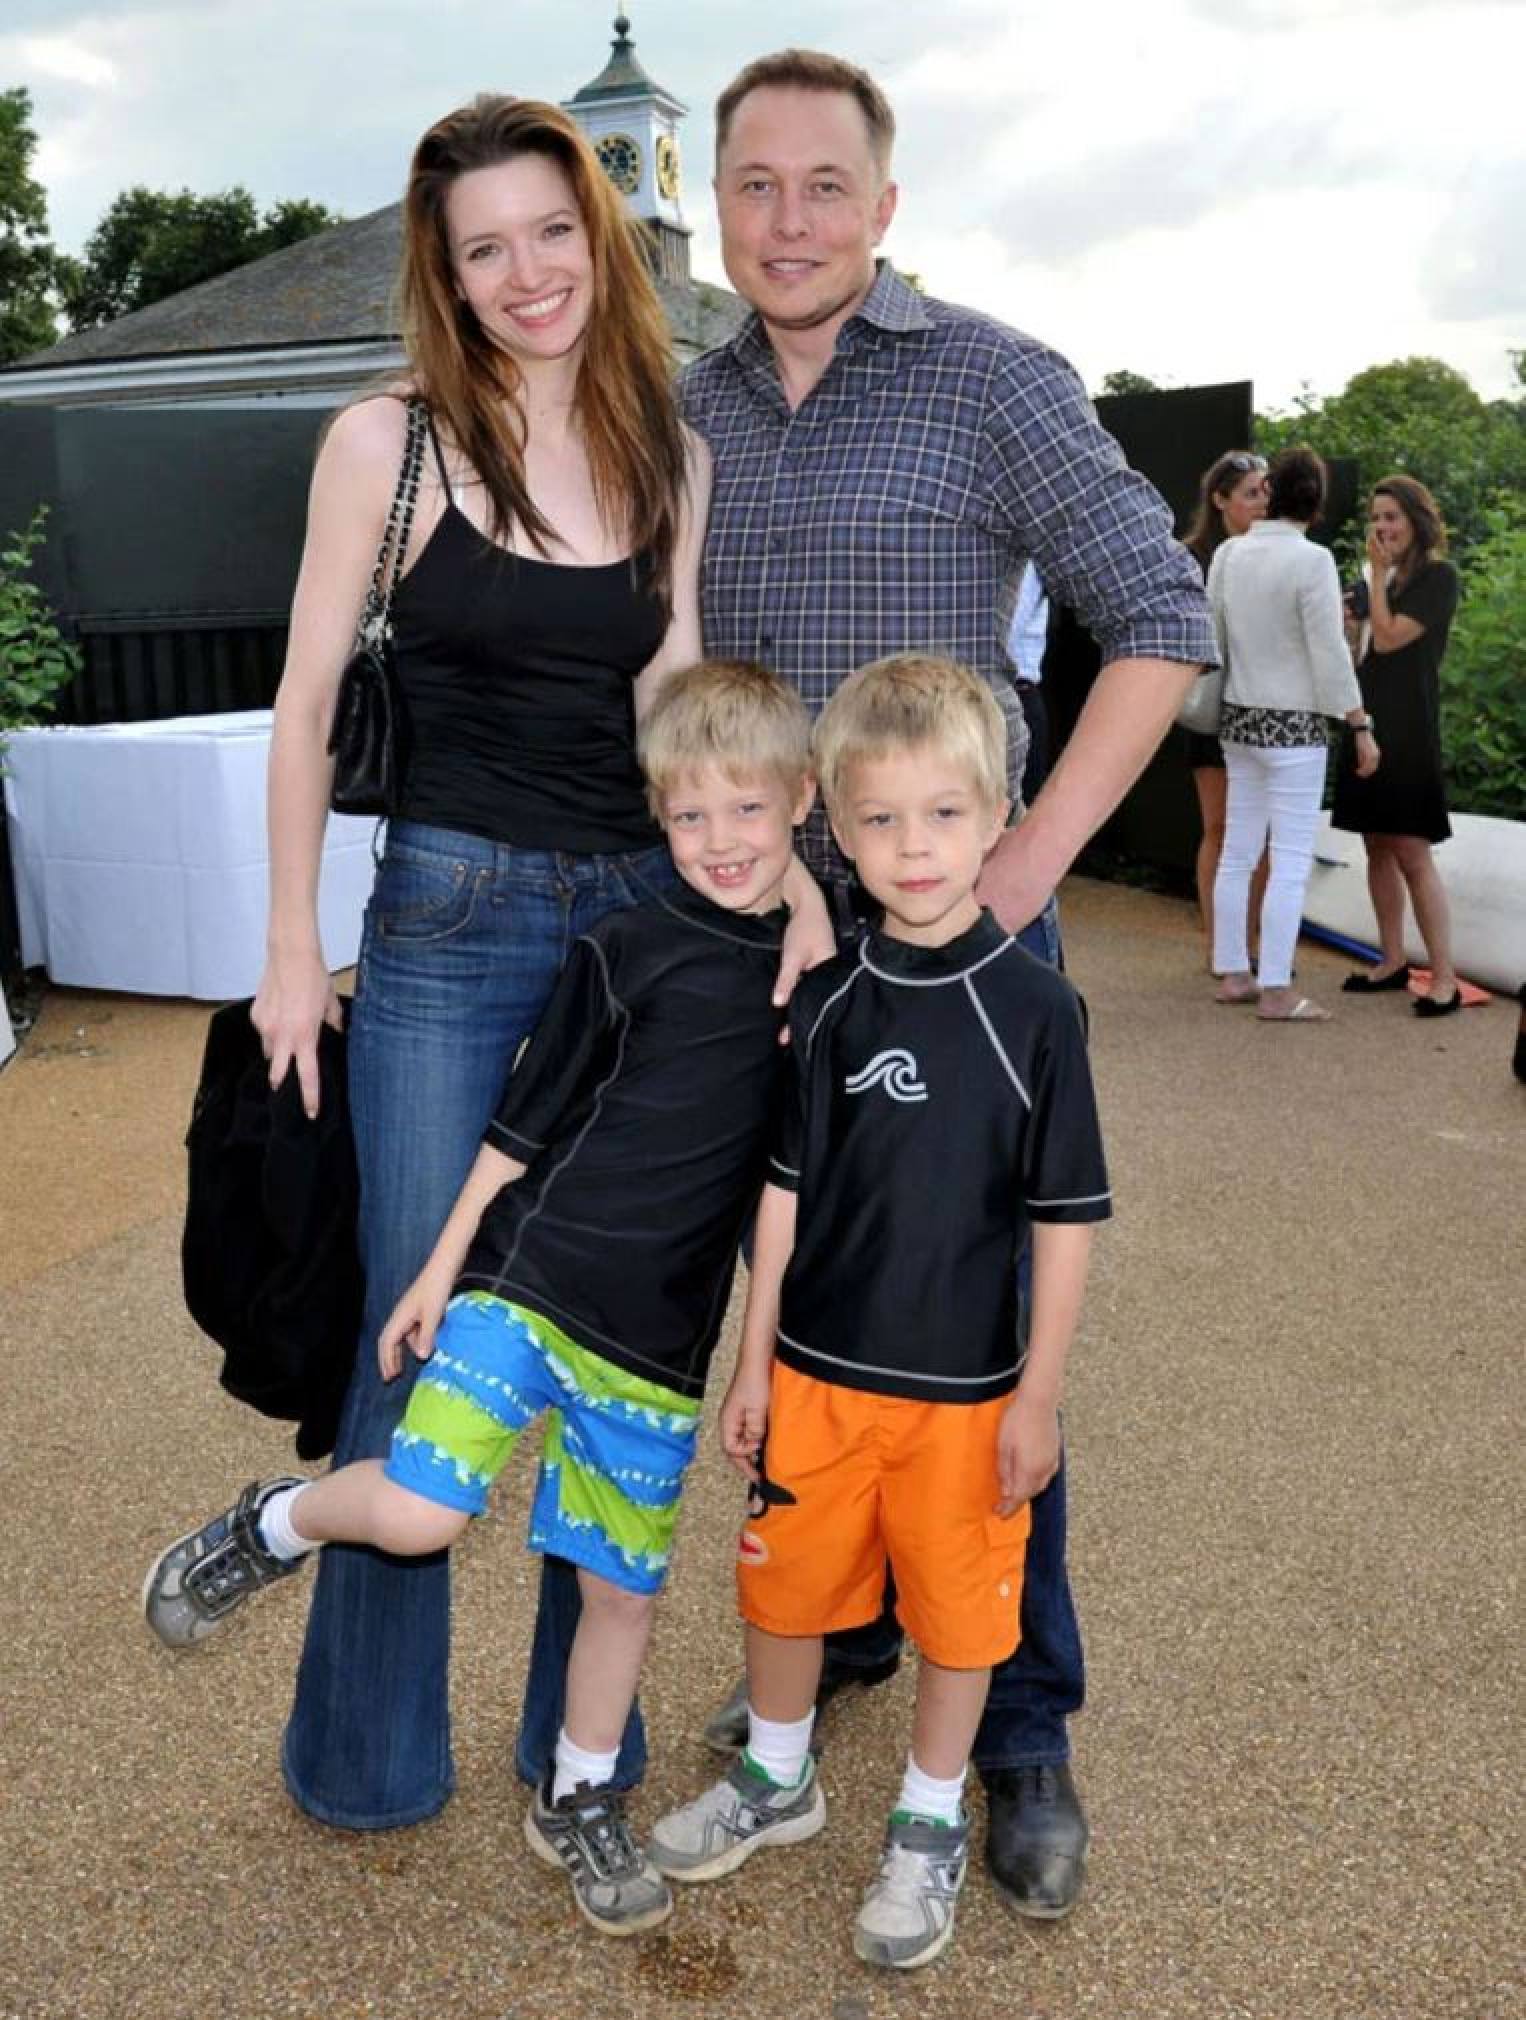 Elon Musk, Talulah Riley and Musk’s children from his previous marriage with Justine Musk. Photo: @elonmusk/Instagram